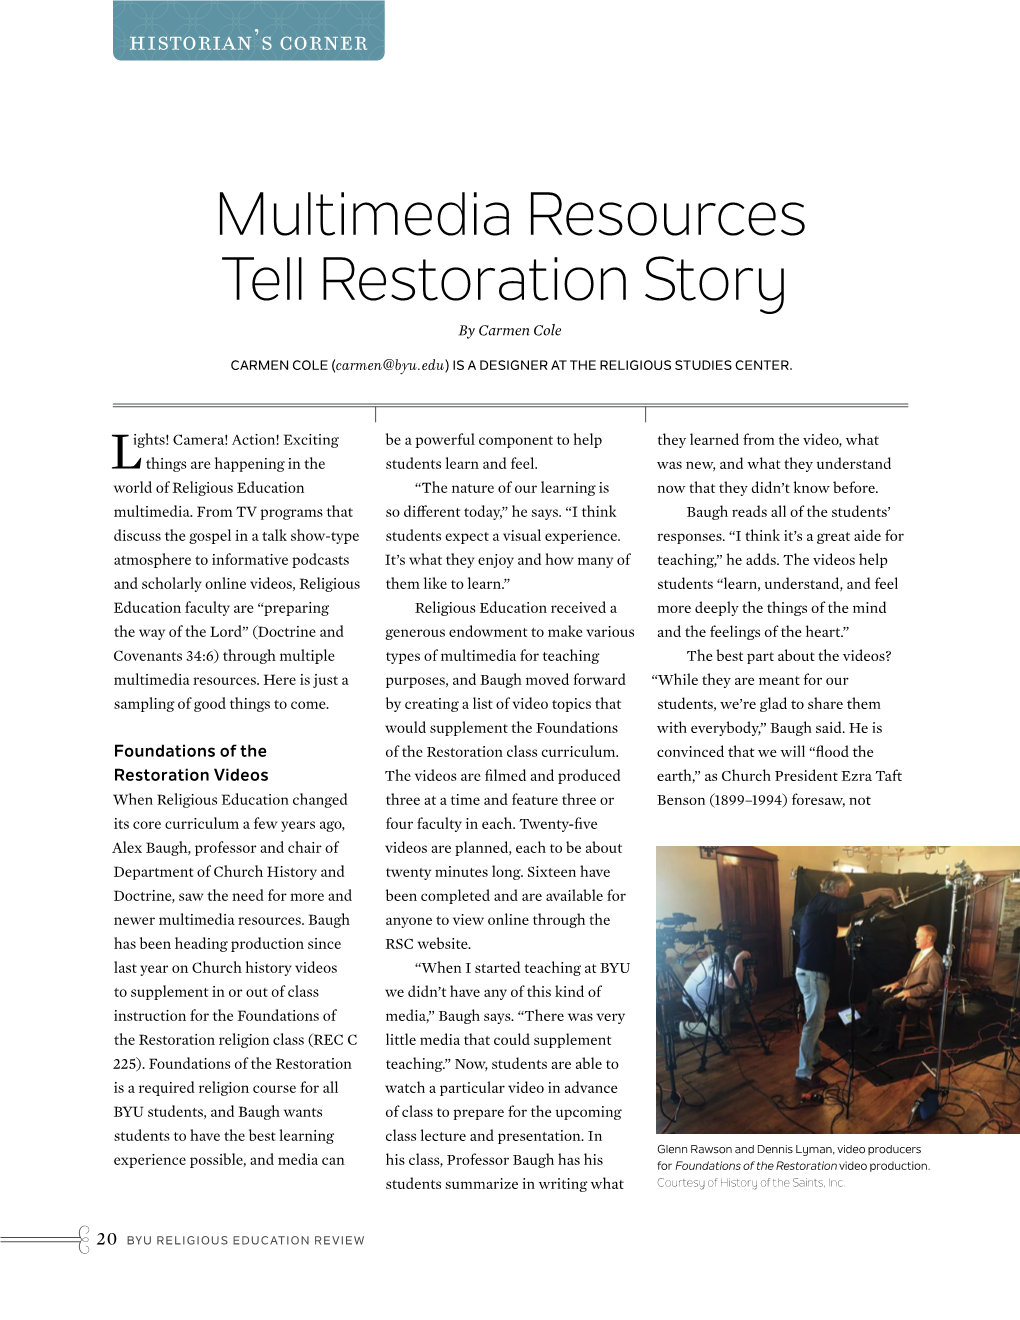 Multimedia Resources Tell Restoration Story by Carmen Cole